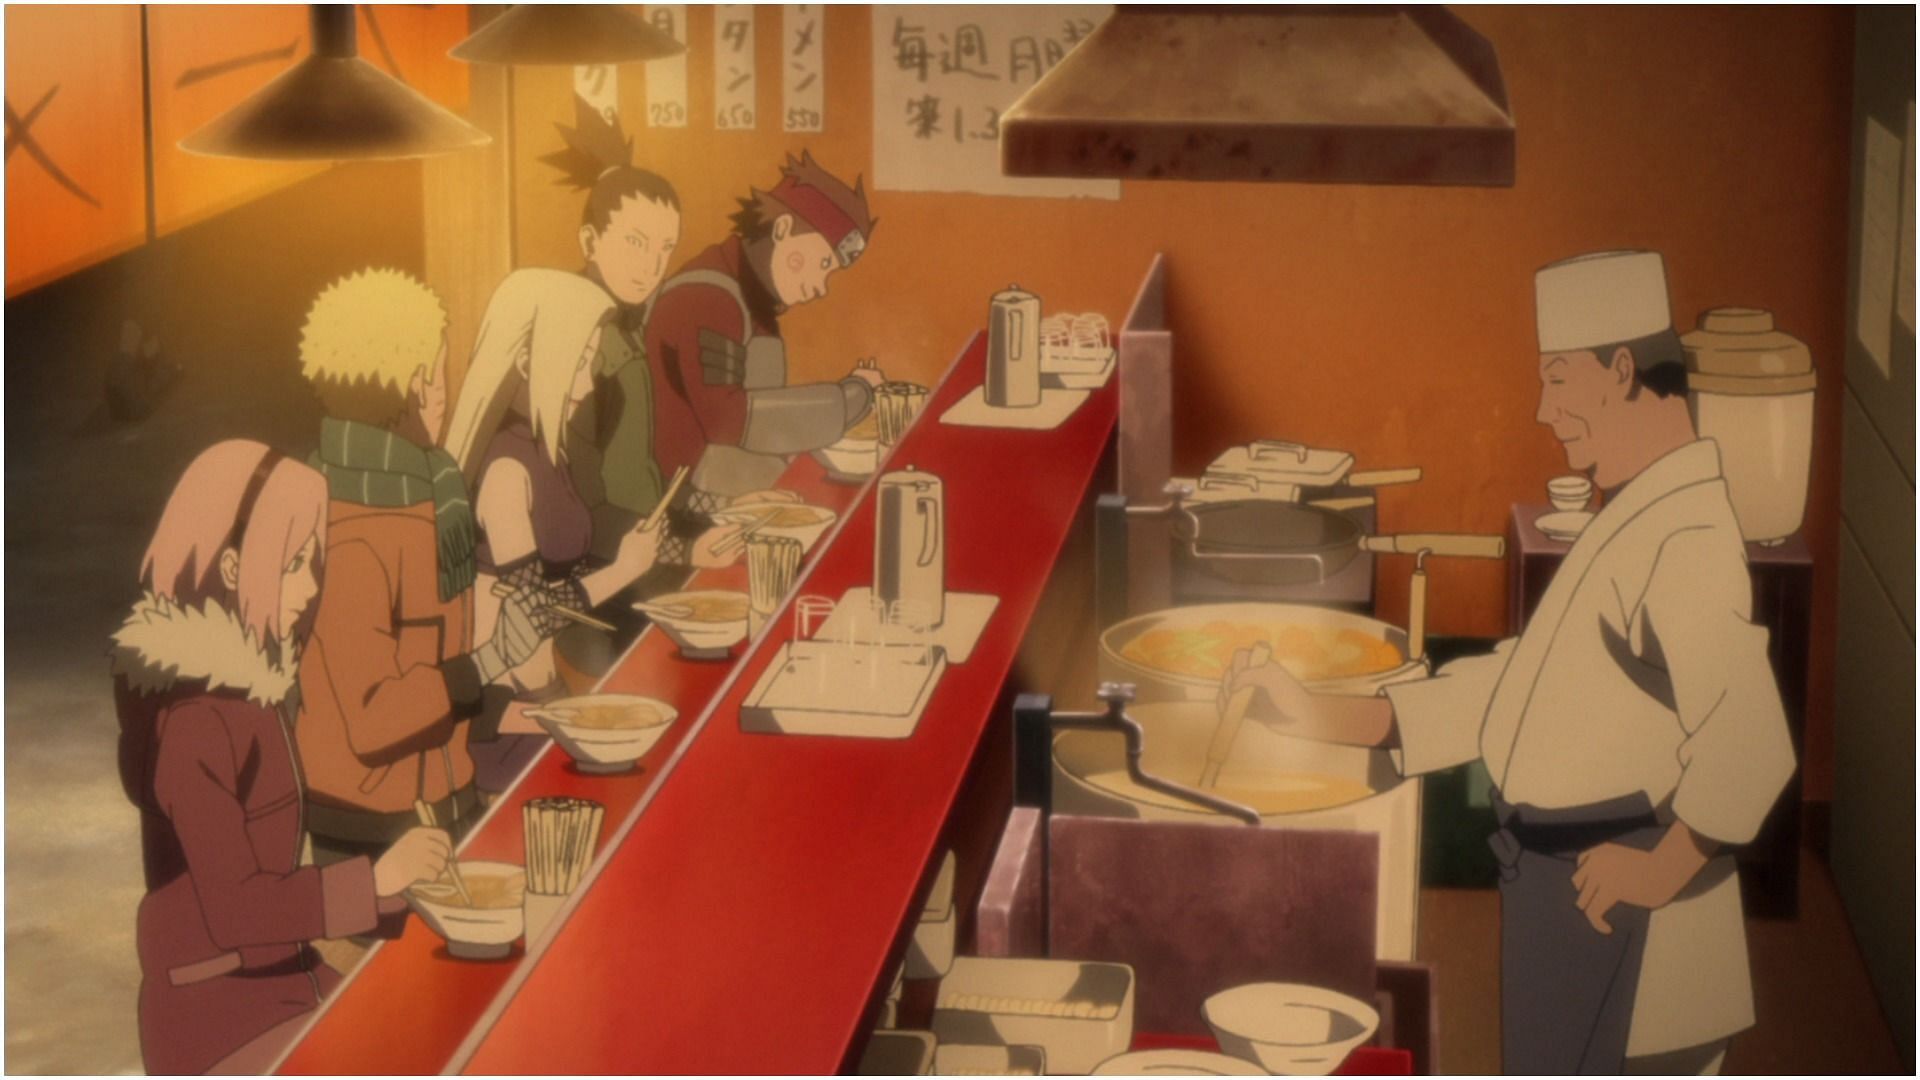 Why was the Ramen guy always nice to Naruto?